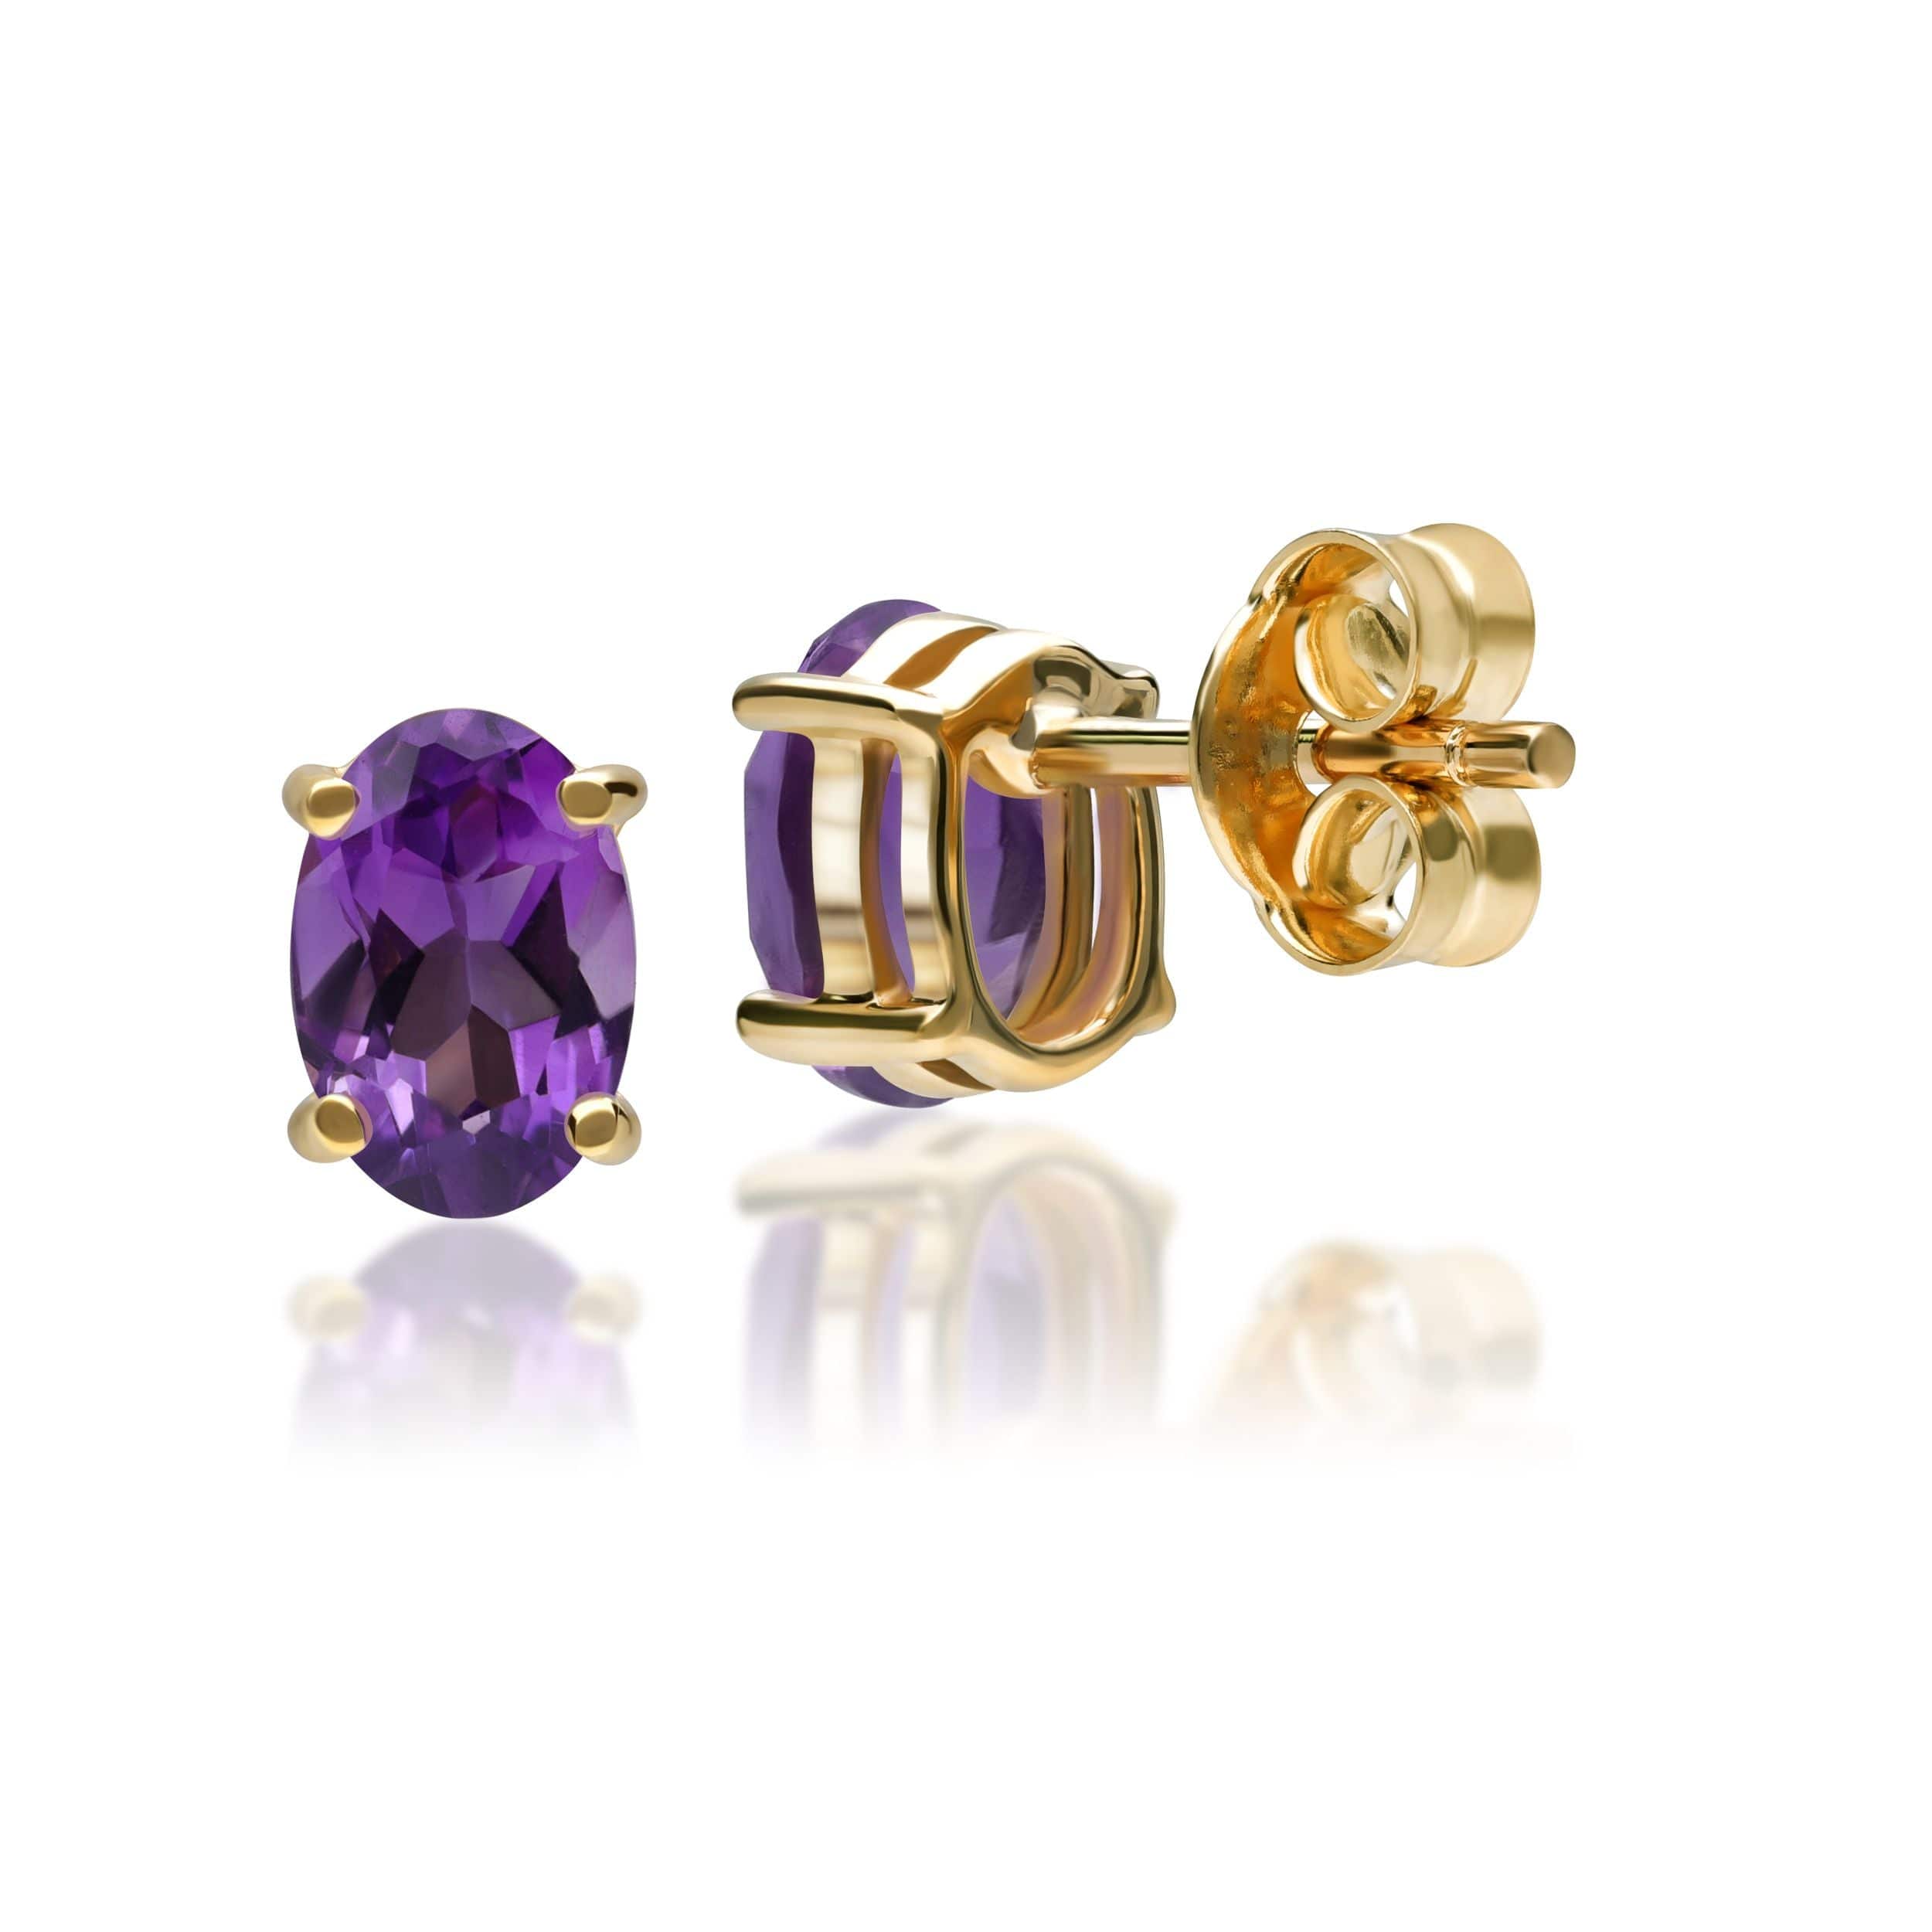 22475 Classic Oval Amethyst Stud Earrings in 9ct Yellow Gold 6x4mm 2